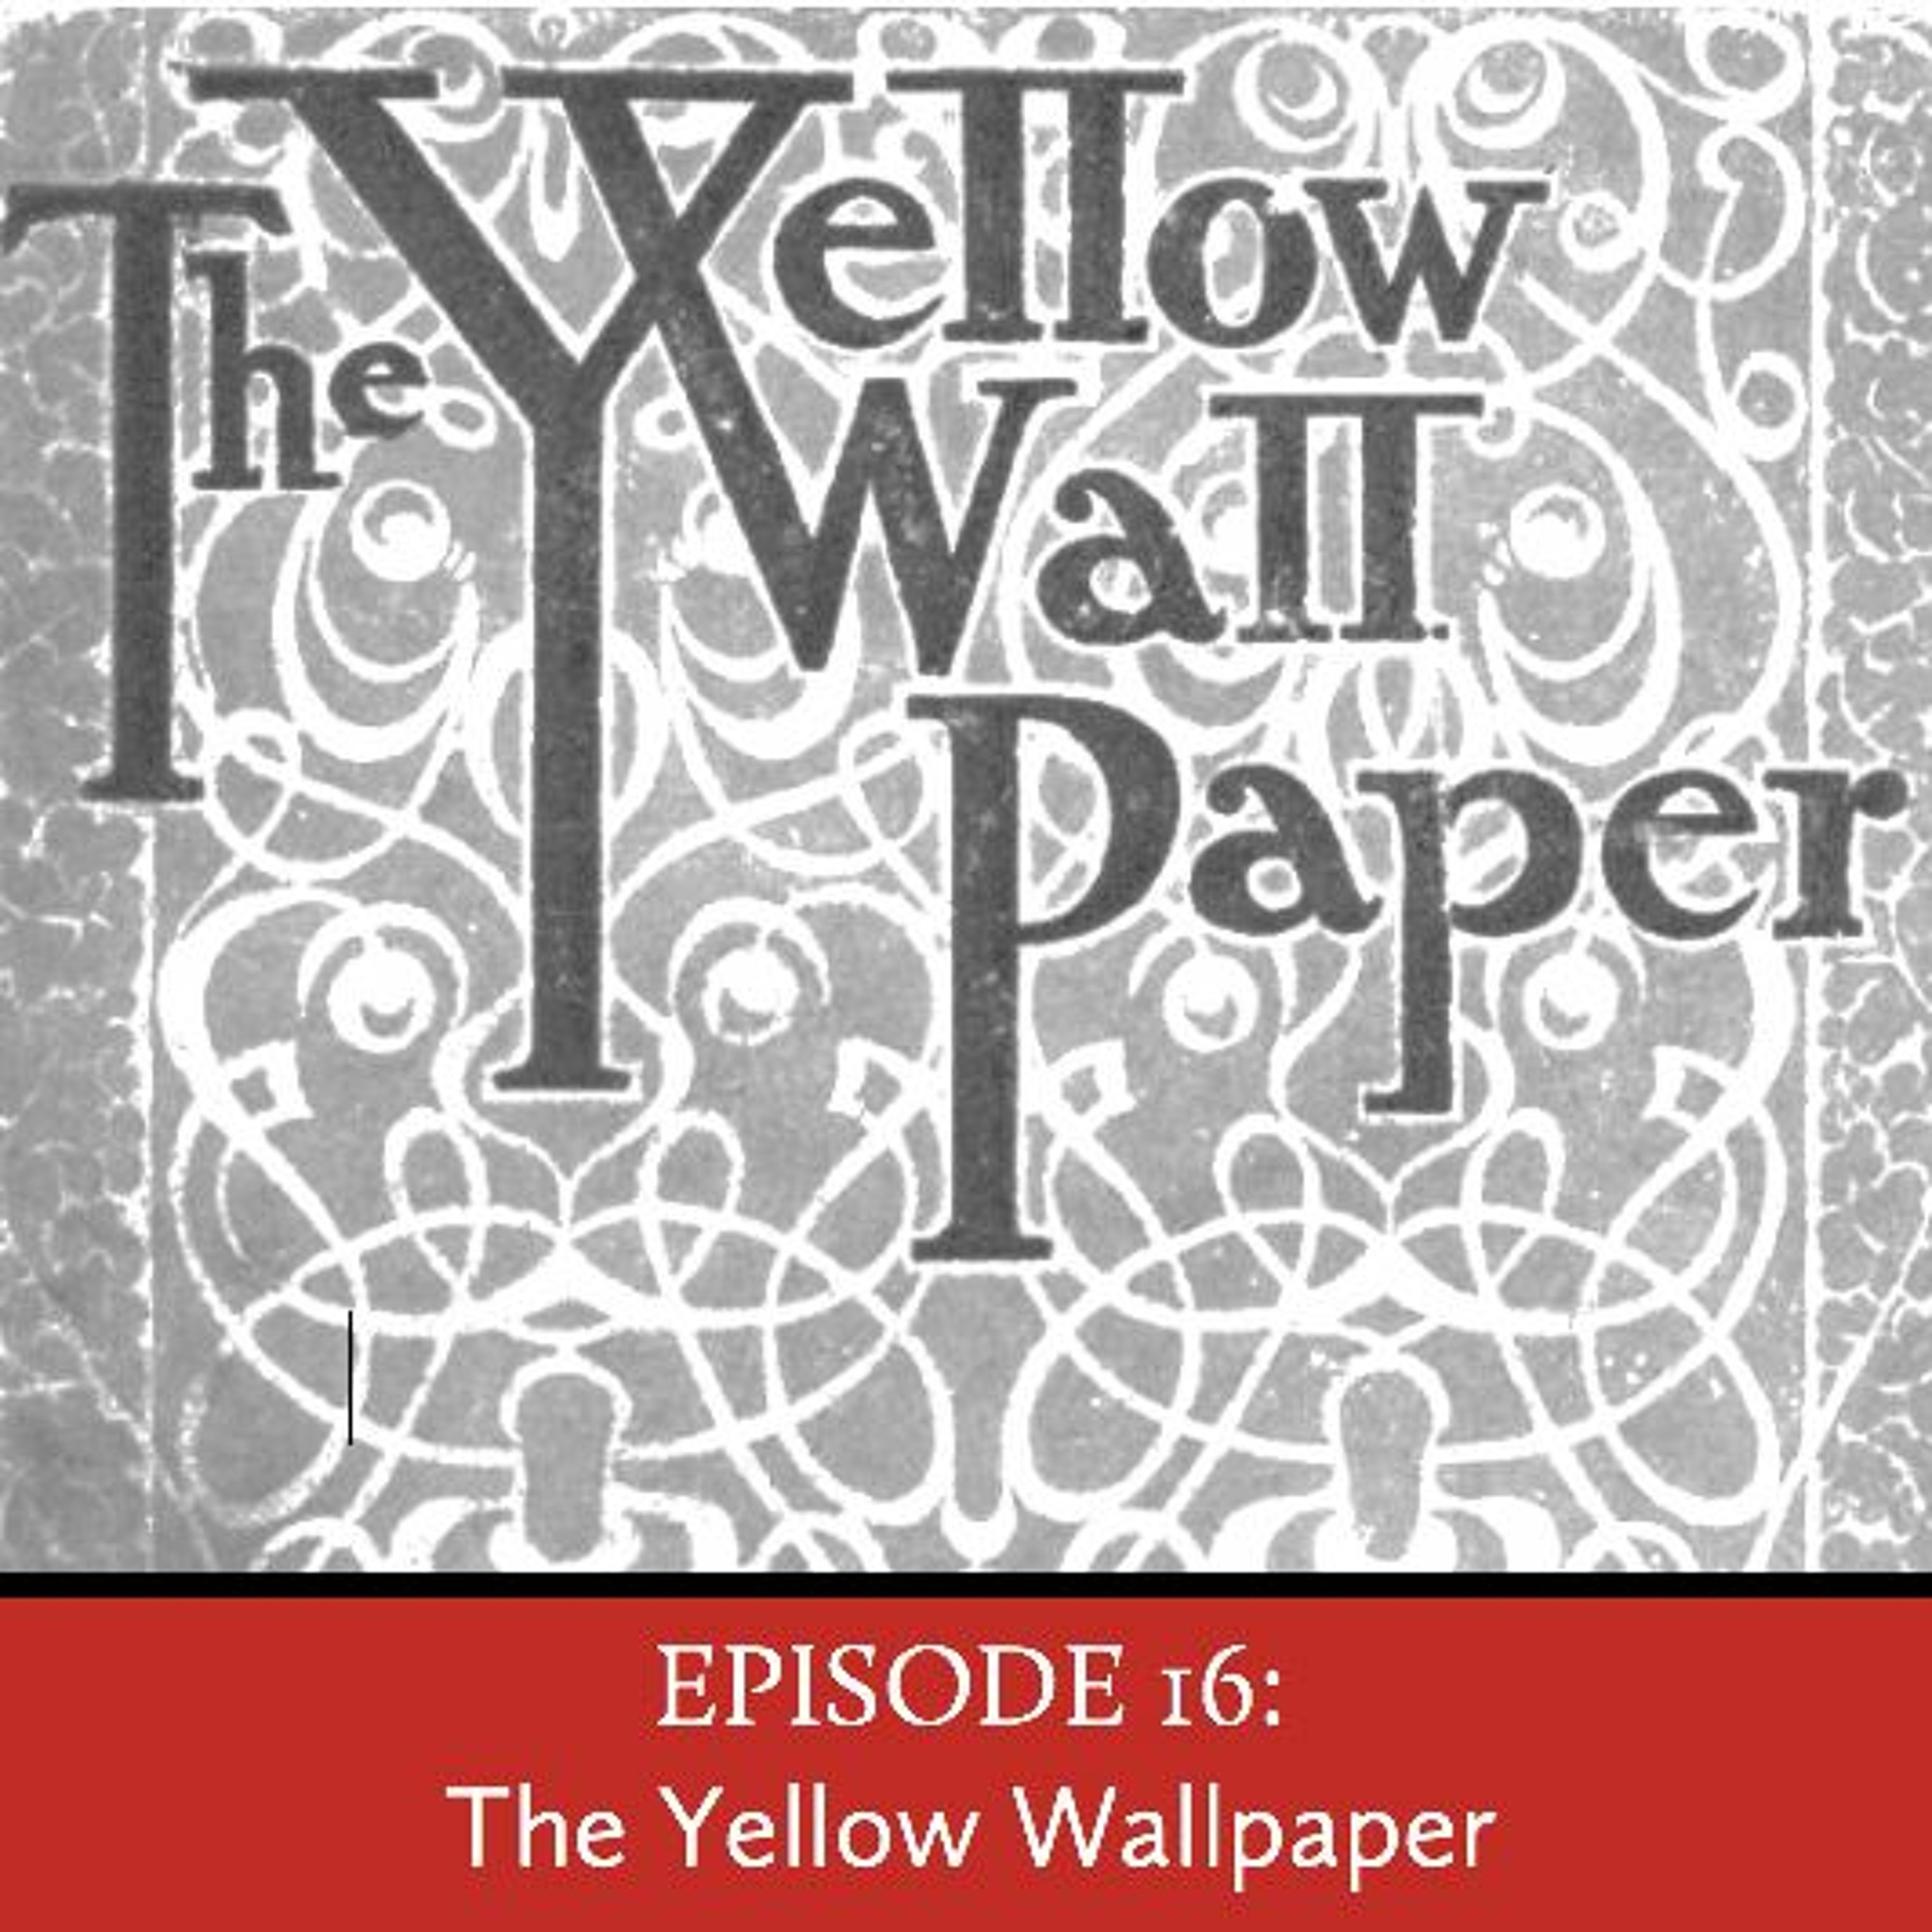 Episode 16: The Yellow Wallpaper